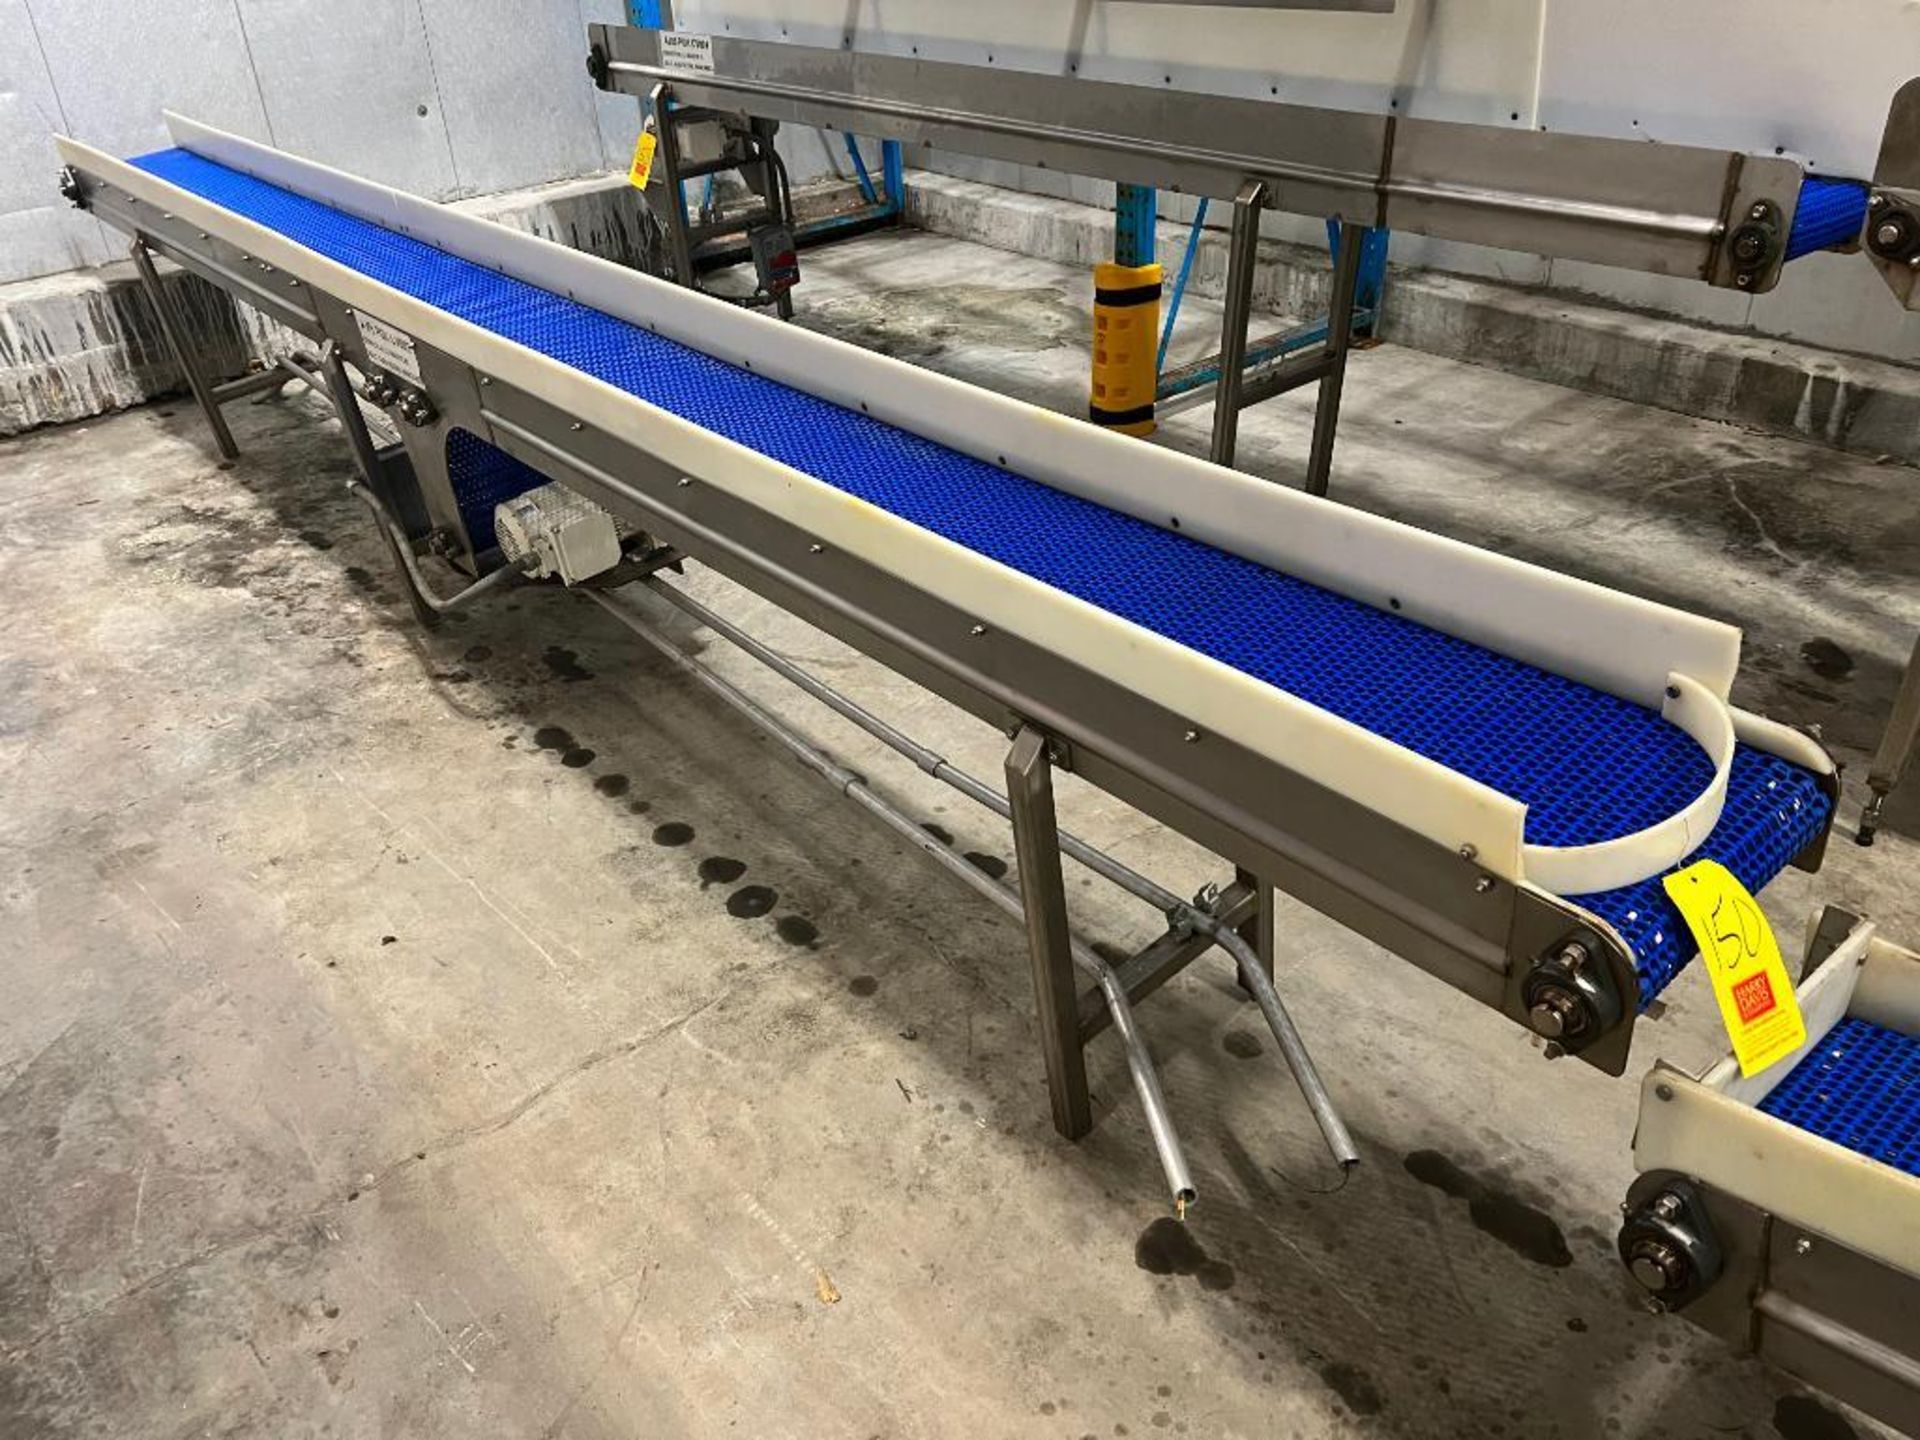 S/S Frame Product Conveyor with Drive, Dimensions = 188" Length x 12" Width - Rigging Fee: $200